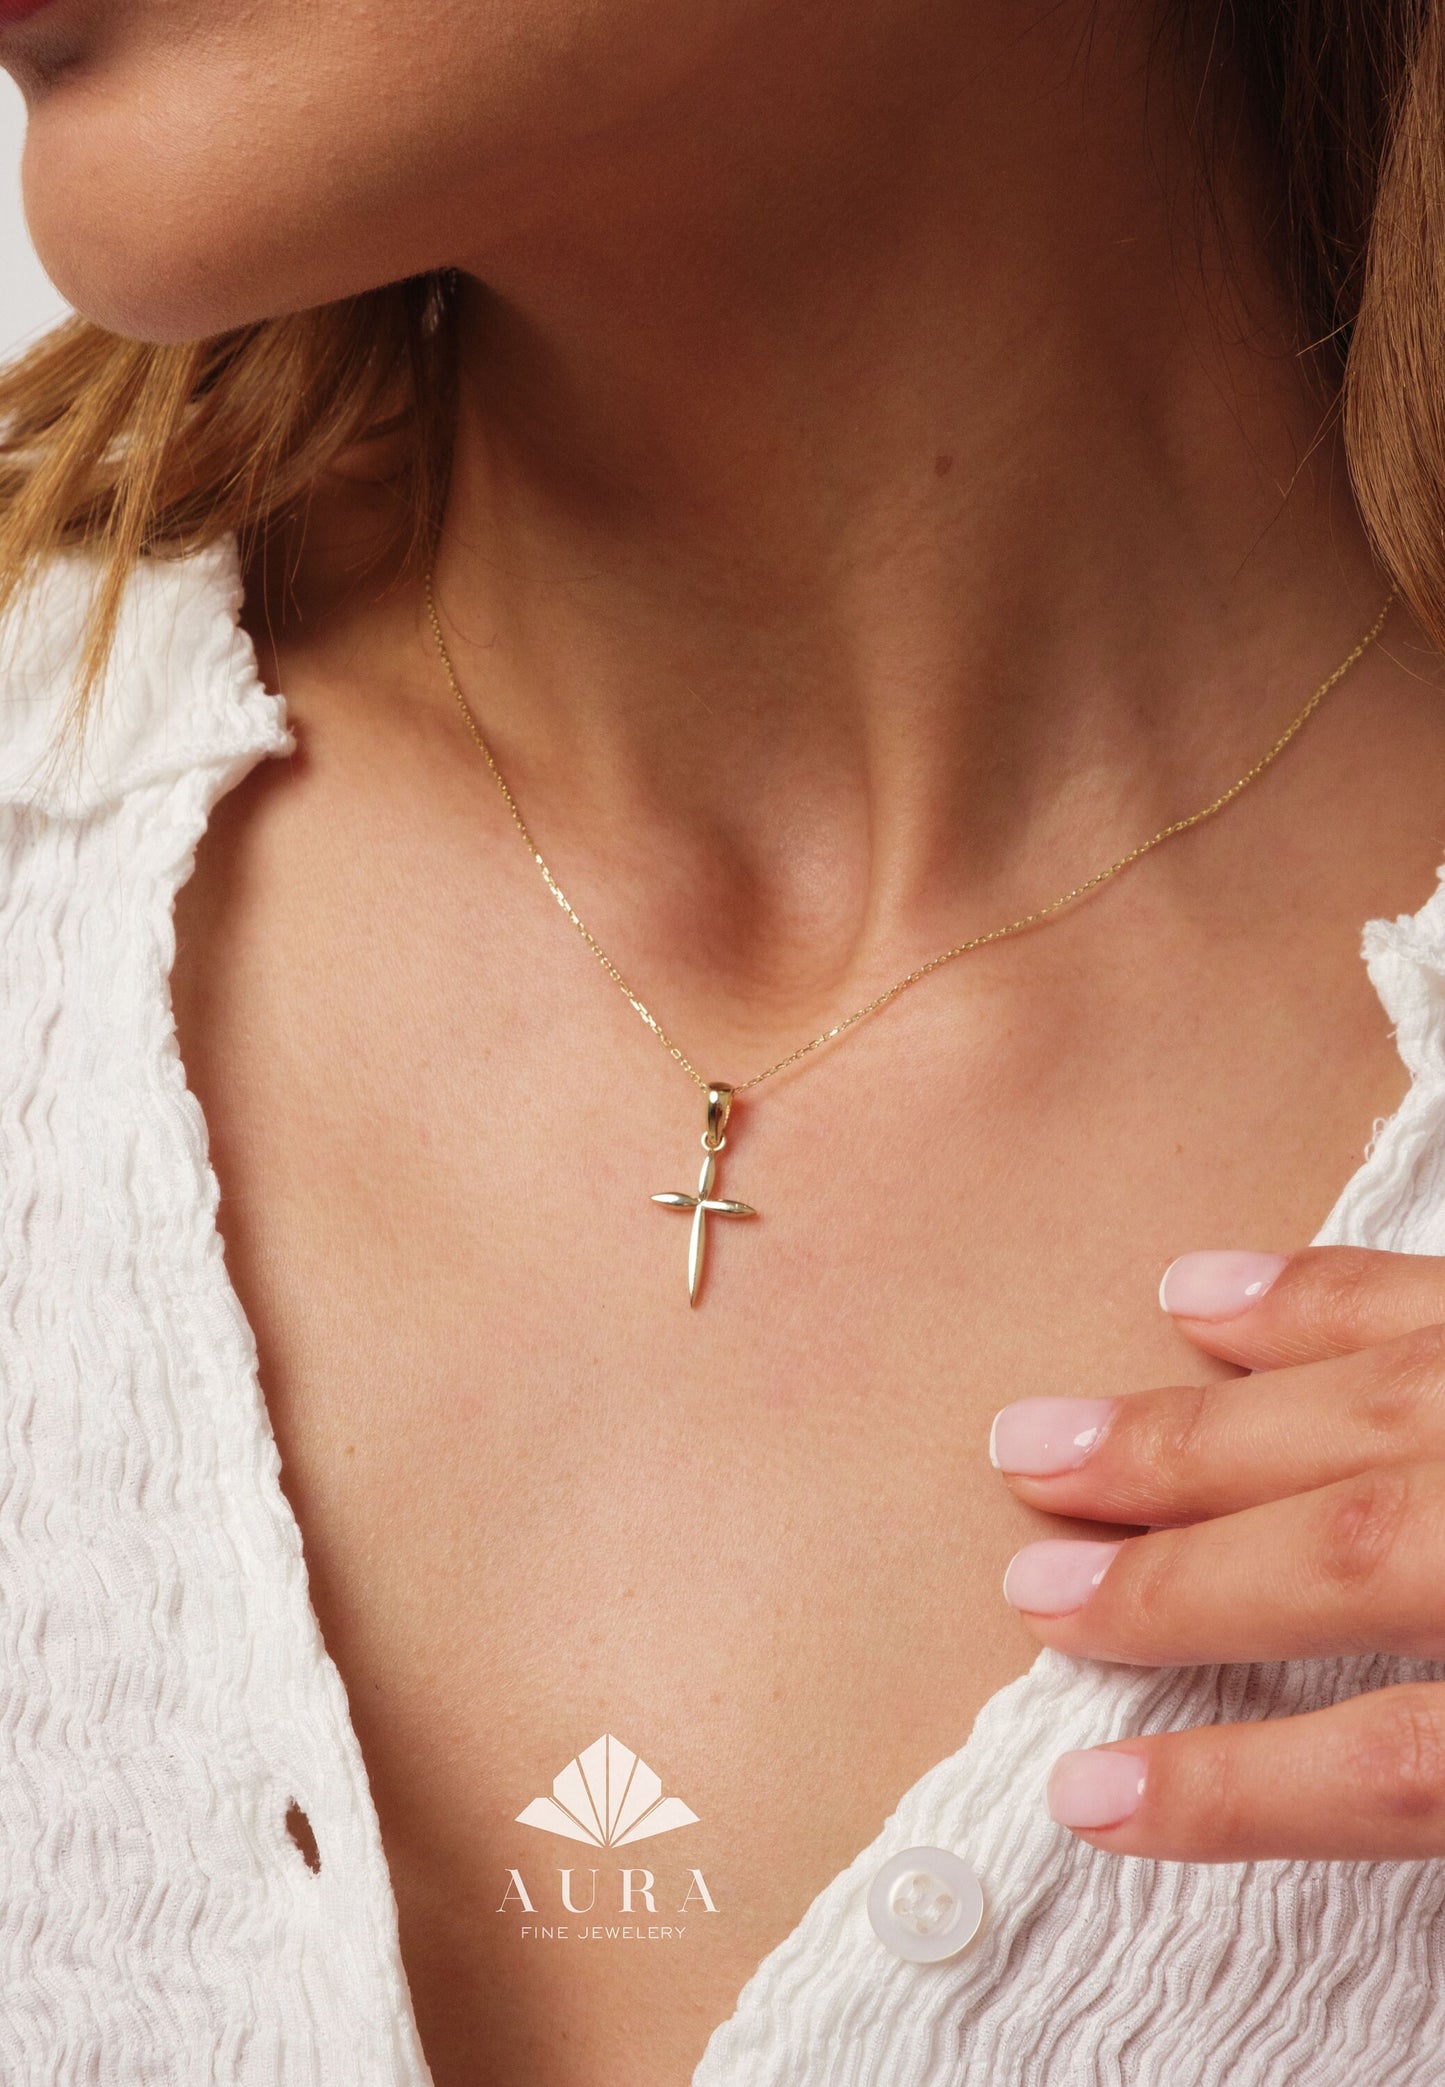 14K Gold Cross Necklace, Crucifix Gold Necklace, Dainty Gold Cross Pendant, Religious Necklace, Small Cross Necklace, Tiny Cross Necklace